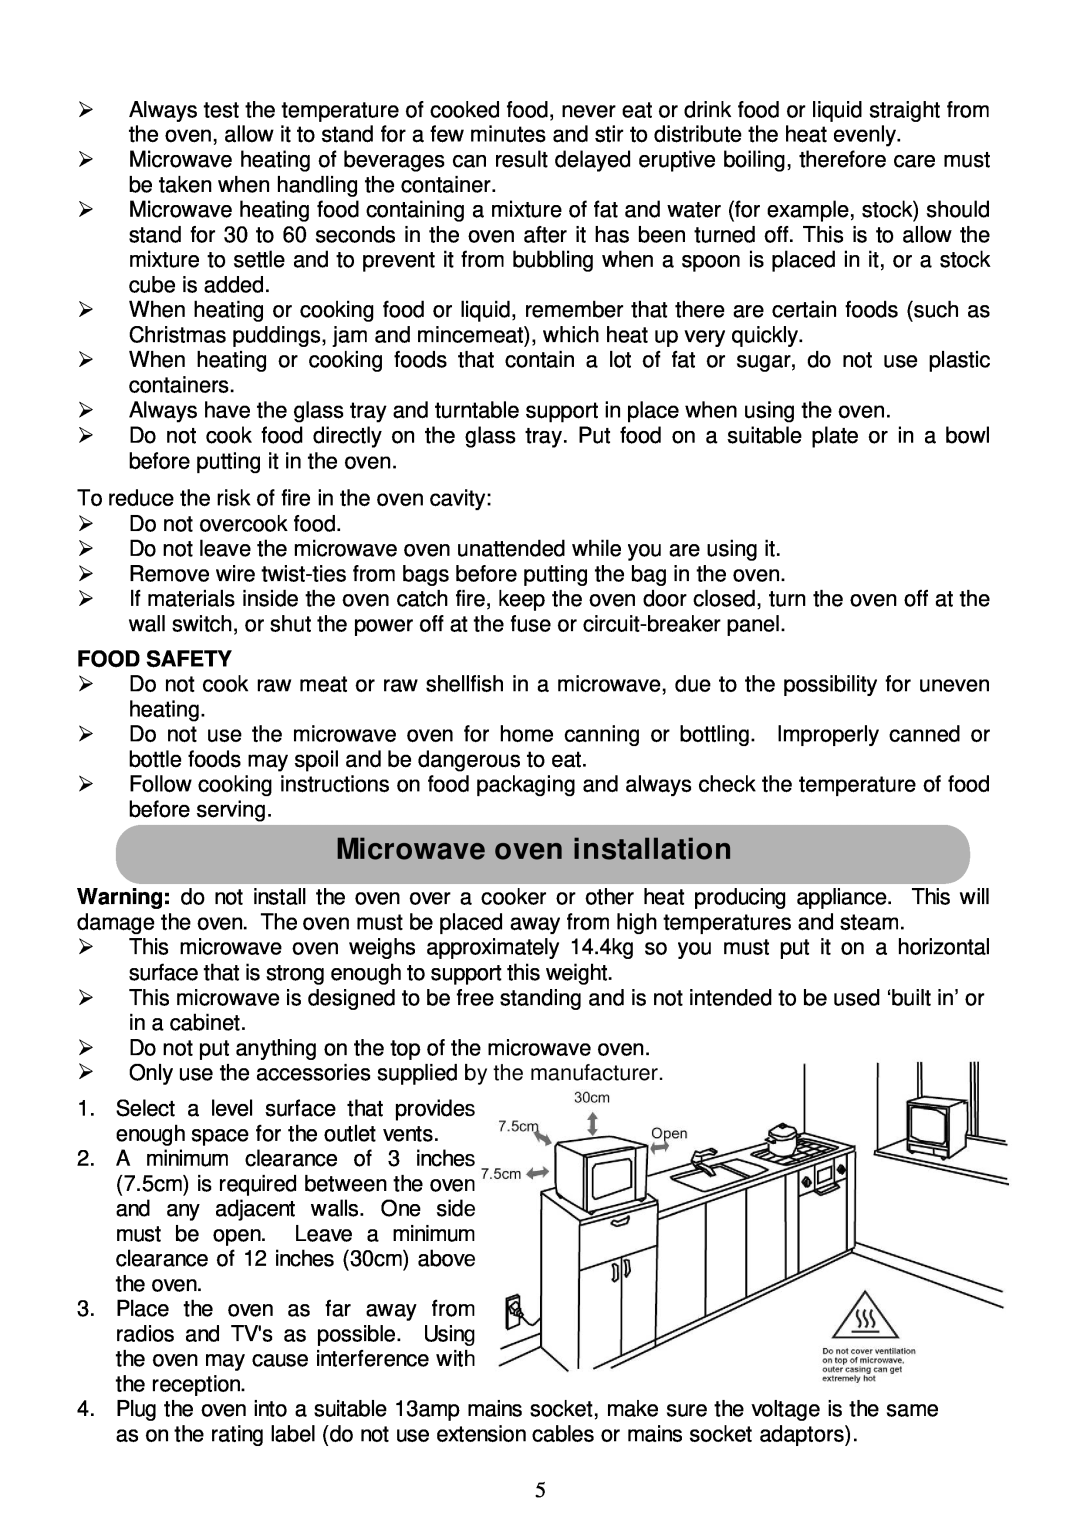 Russell Hobbs RHM2011 user manual Microwave oven installation, Food Safety 